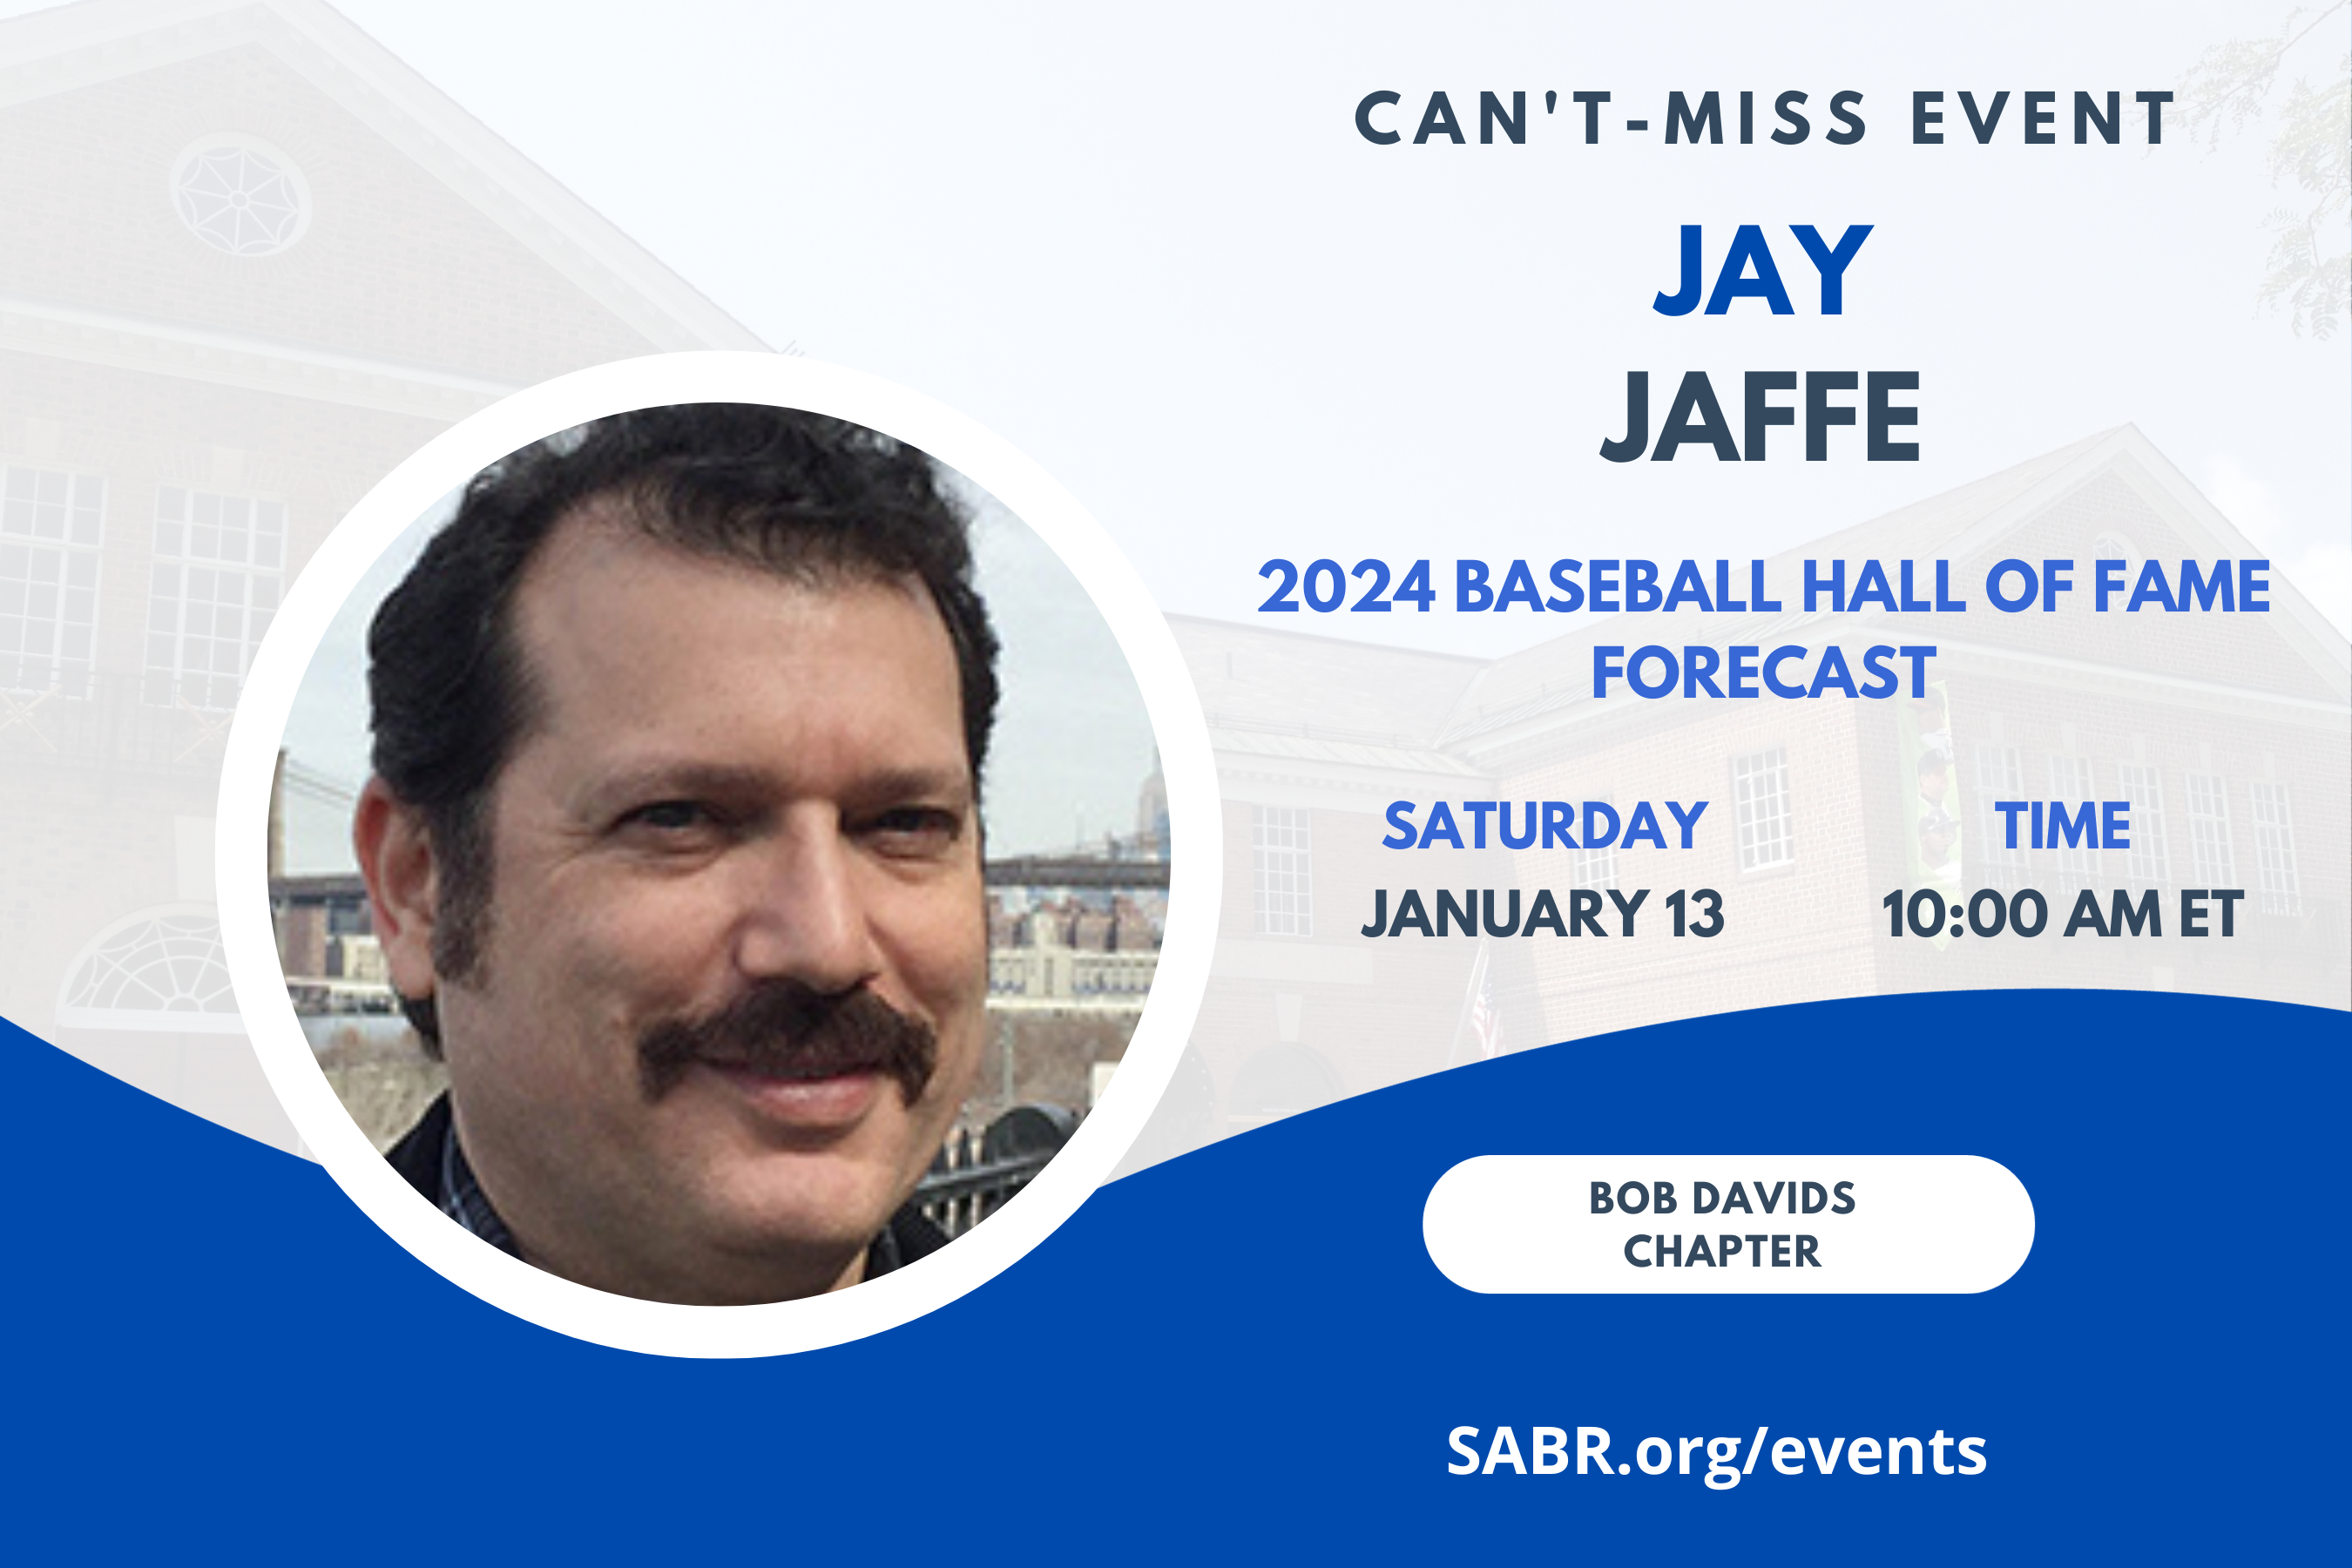 The next "Talkin' Baseball" meeting, hosted by the SABR Bob Davids Chapter in Washington D.C. and surrounding communities in Maryland and Virginia, will be held via Zoom at 10:00 a.m. Eastern on Saturday, January 13, 2024. All baseball fans are welcome to attend. We are pleased to welcome back Jay Jaffe, senior writer for FanGraphs and author of "The Cooperstown Casebook", who is graciously coming back to talk with us for a 3rd year in a row about his book, his ballot, and pre-announcement Hall of Fame voting trends. 